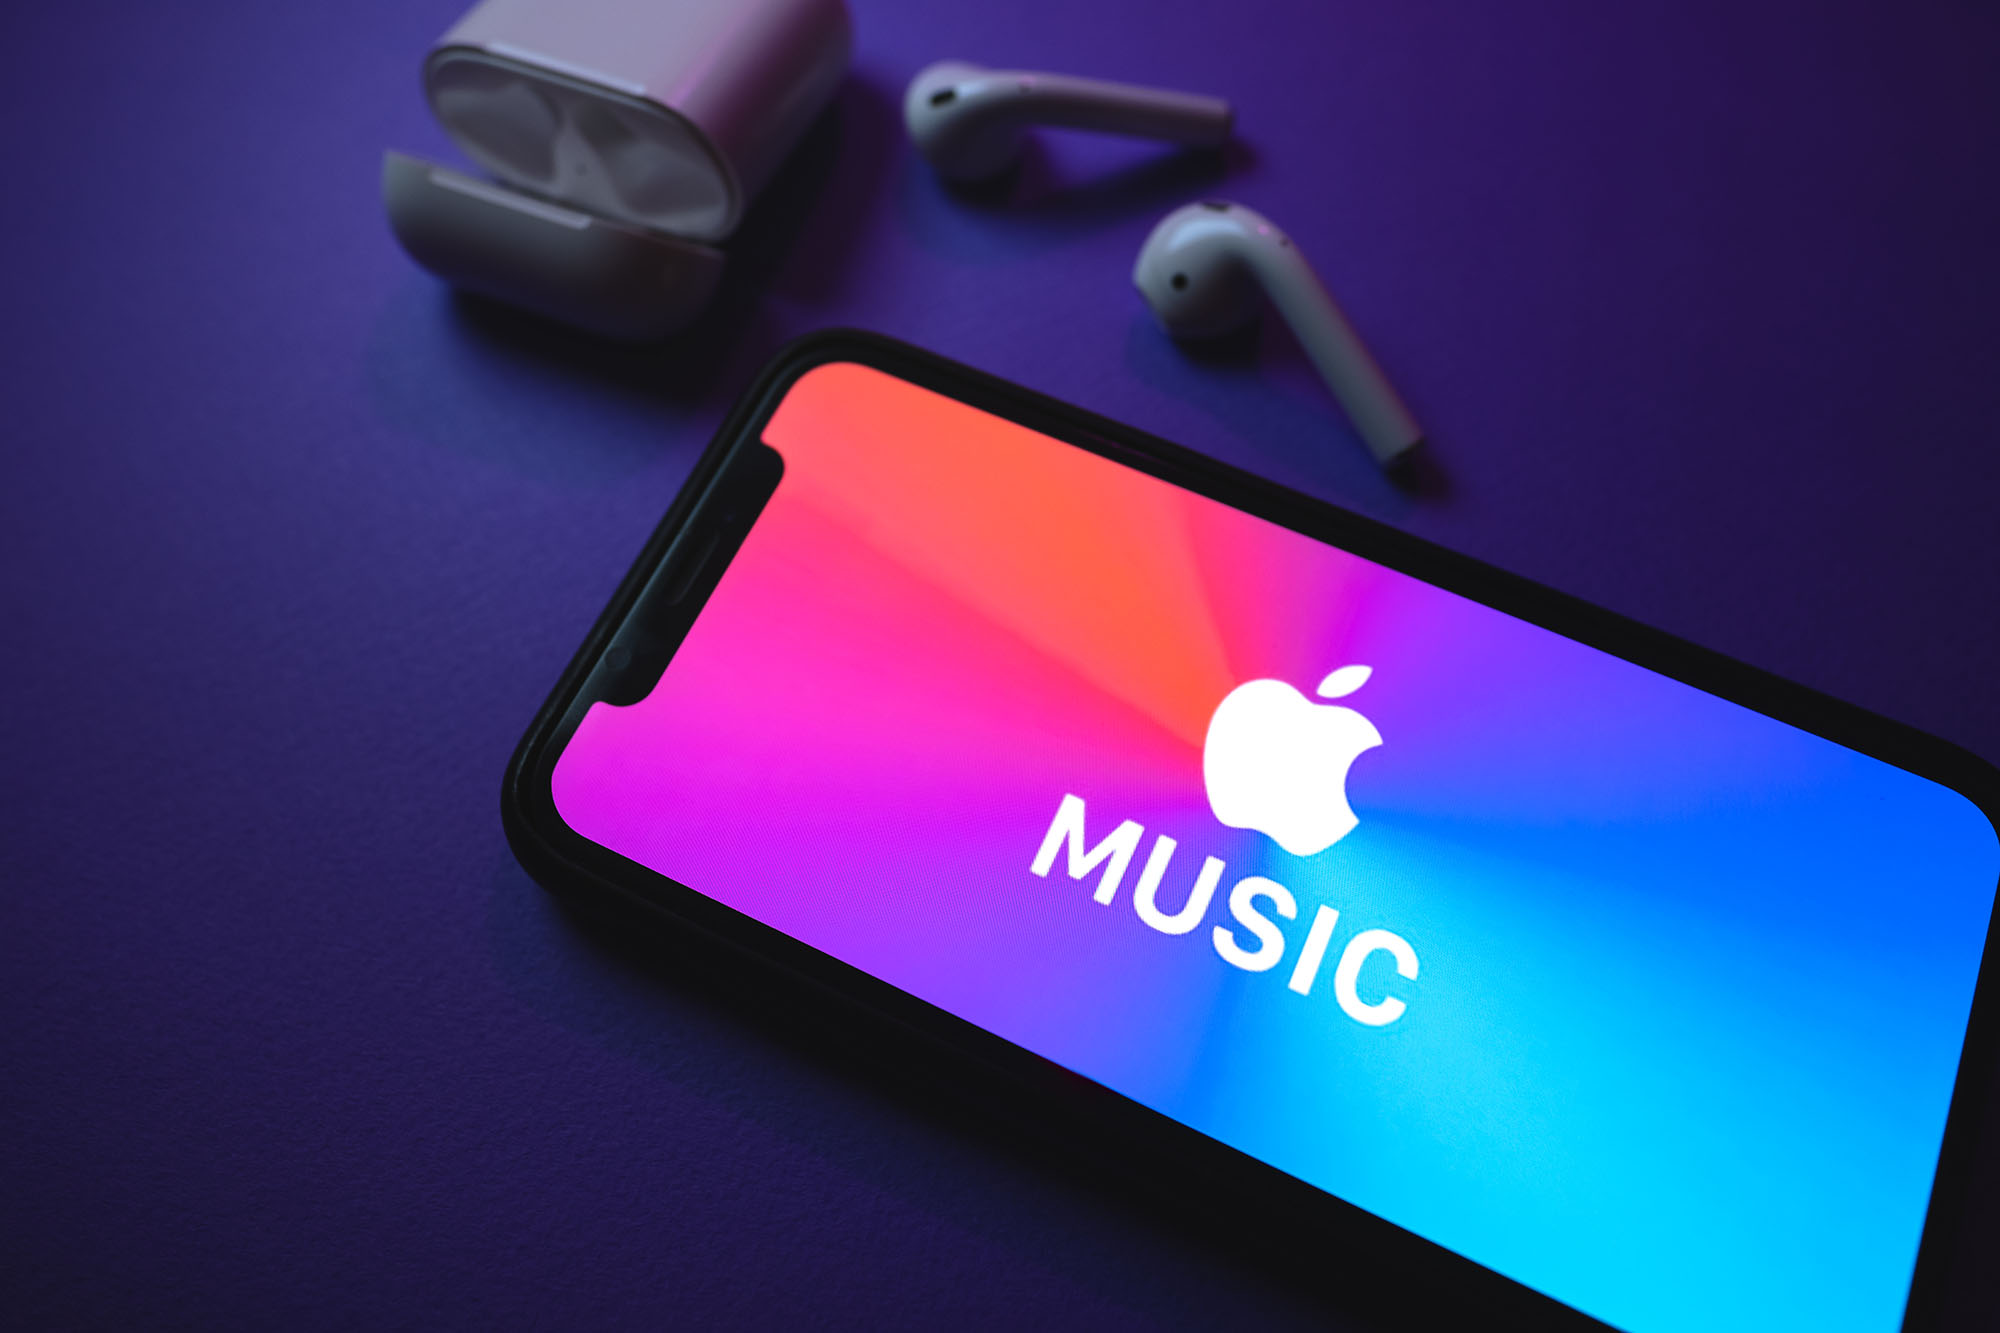 NowPlaying: Explore Music on iPad, iPhone & Apple Watch - Music Facts &  Details App